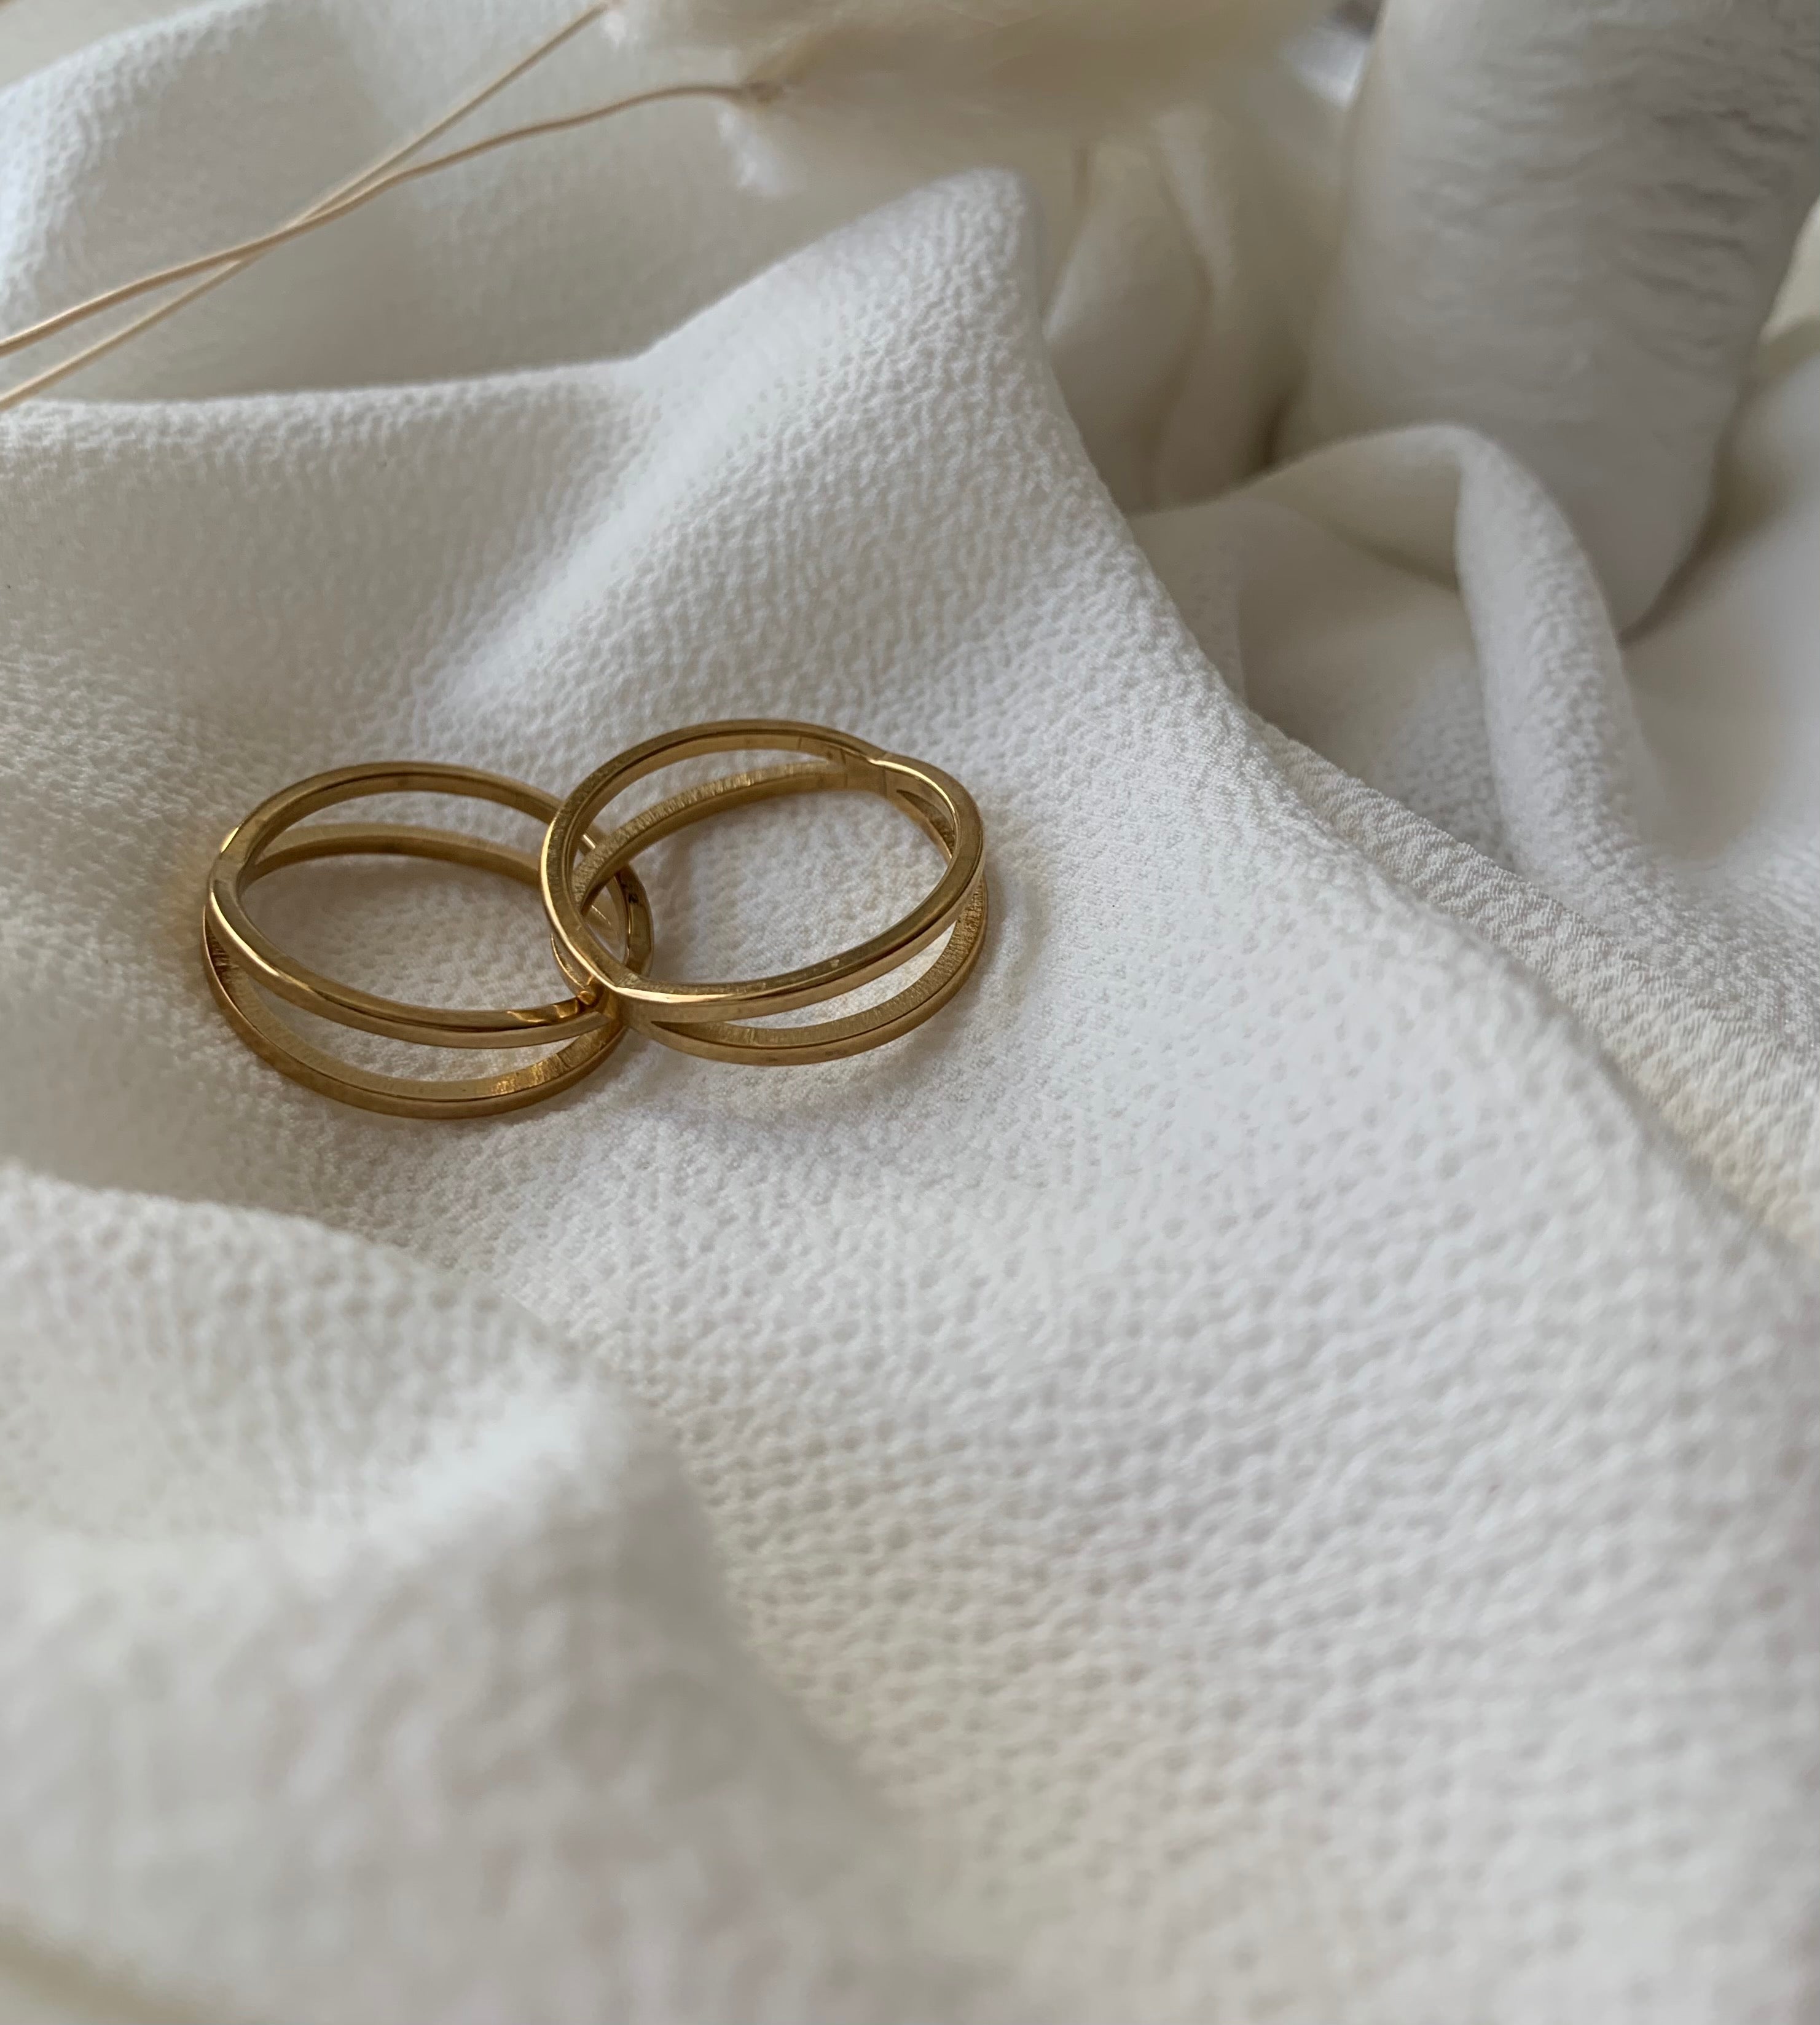 Refined elegance featuring two thin crossed bands! 14K Gold Plated Hypoallergenic Tarnish Resistant Available sizes: 6, 7, 8 | Marianne Ring | Non-tarnish 14k Jewellery EasyClubCo